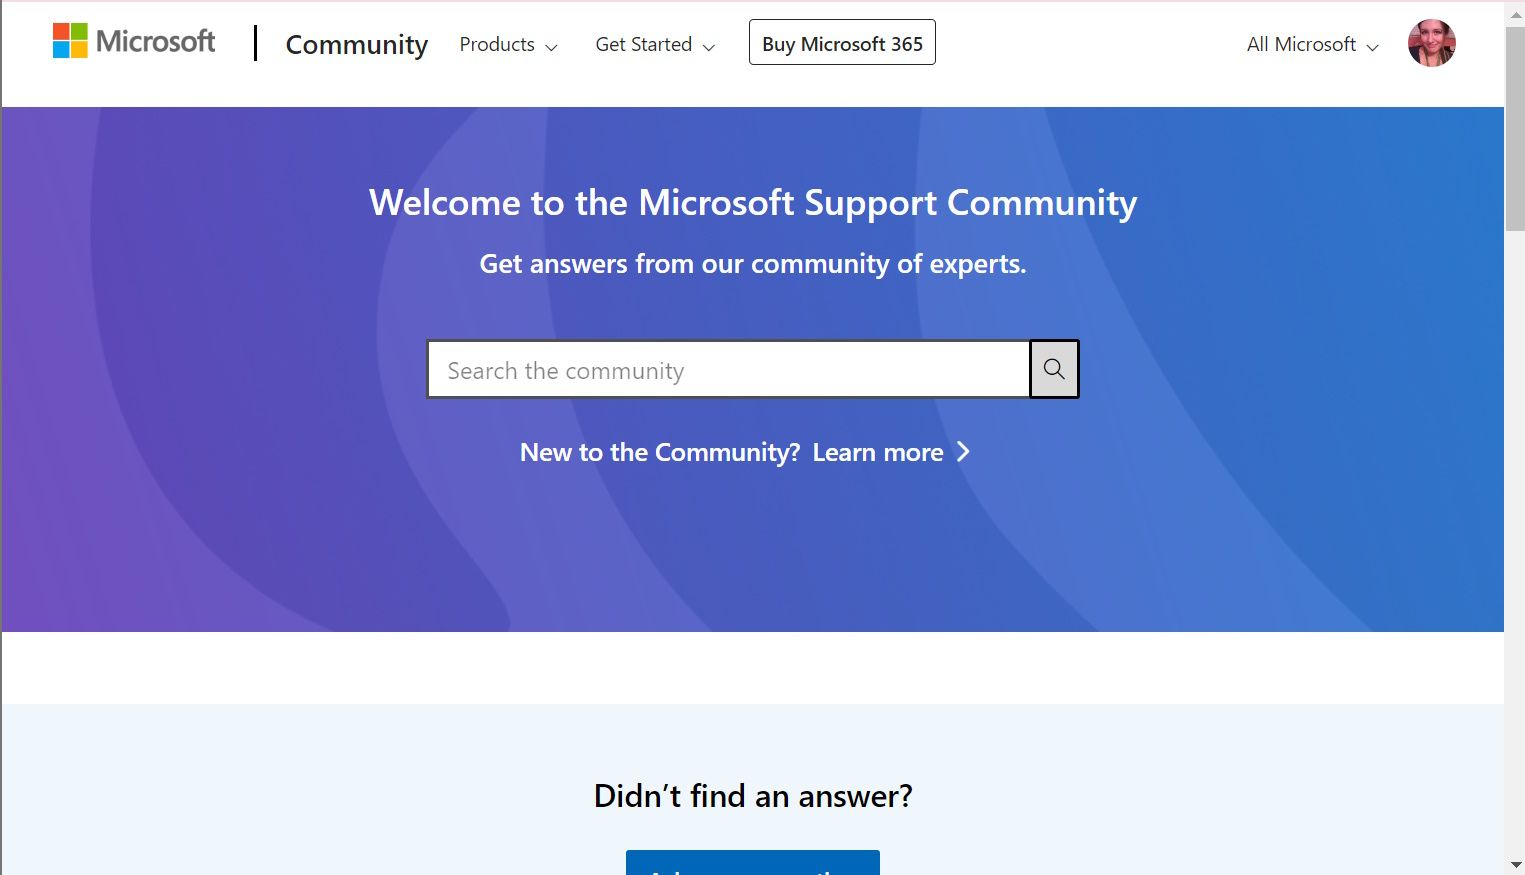 Microsoft Support community page with search the community box 